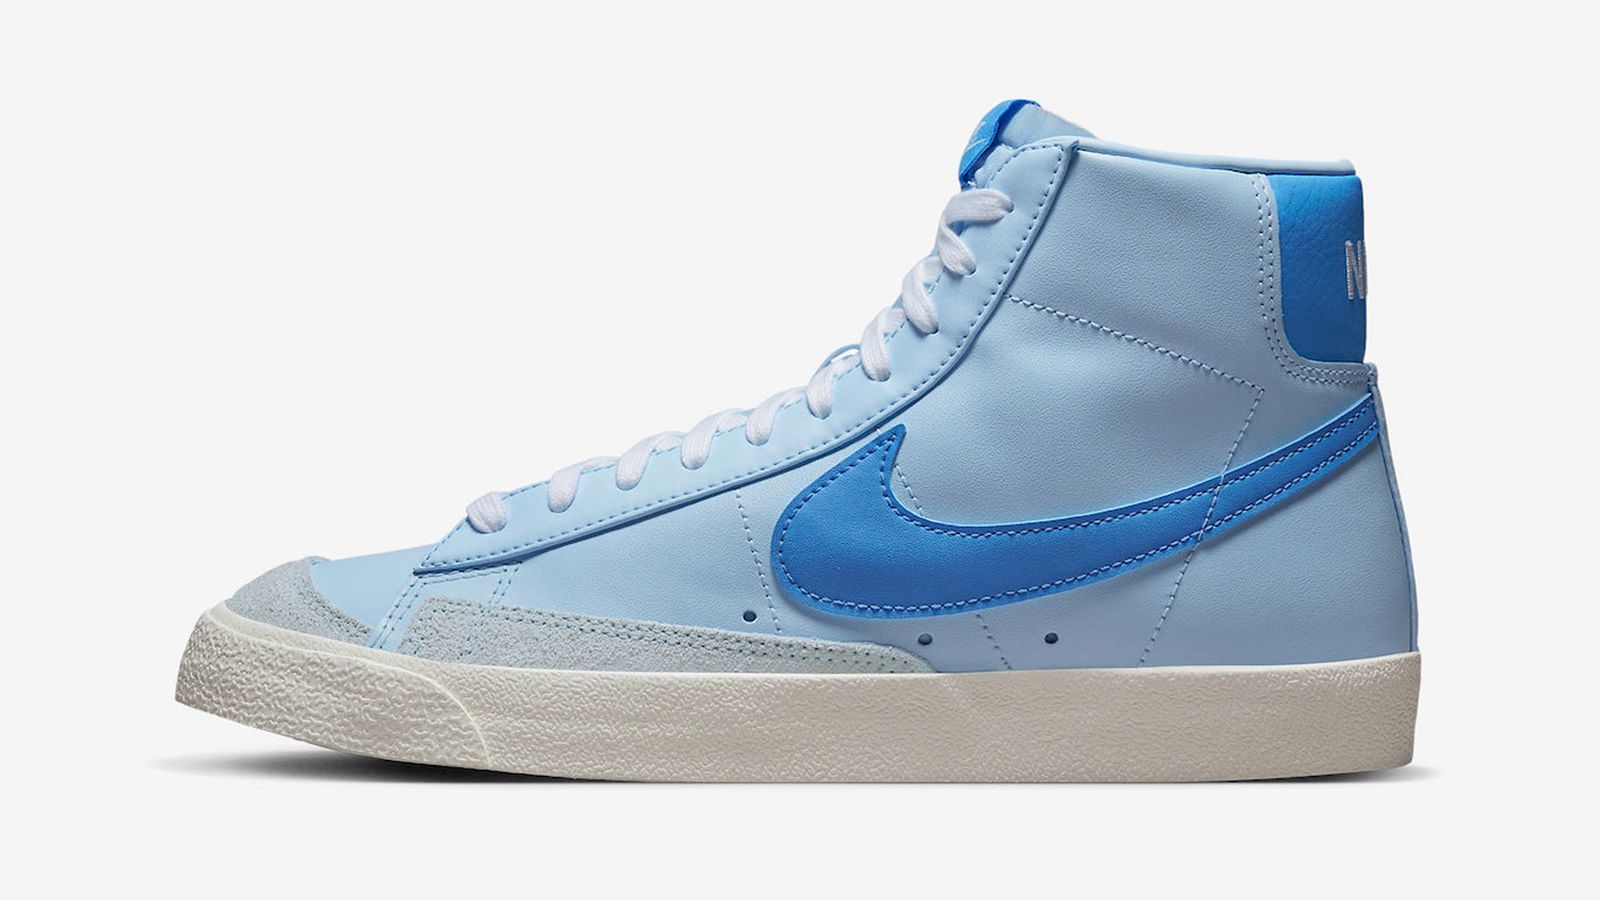 Nike Blazer product image of a light blue high-top with a dark blue Swoosh along the side.